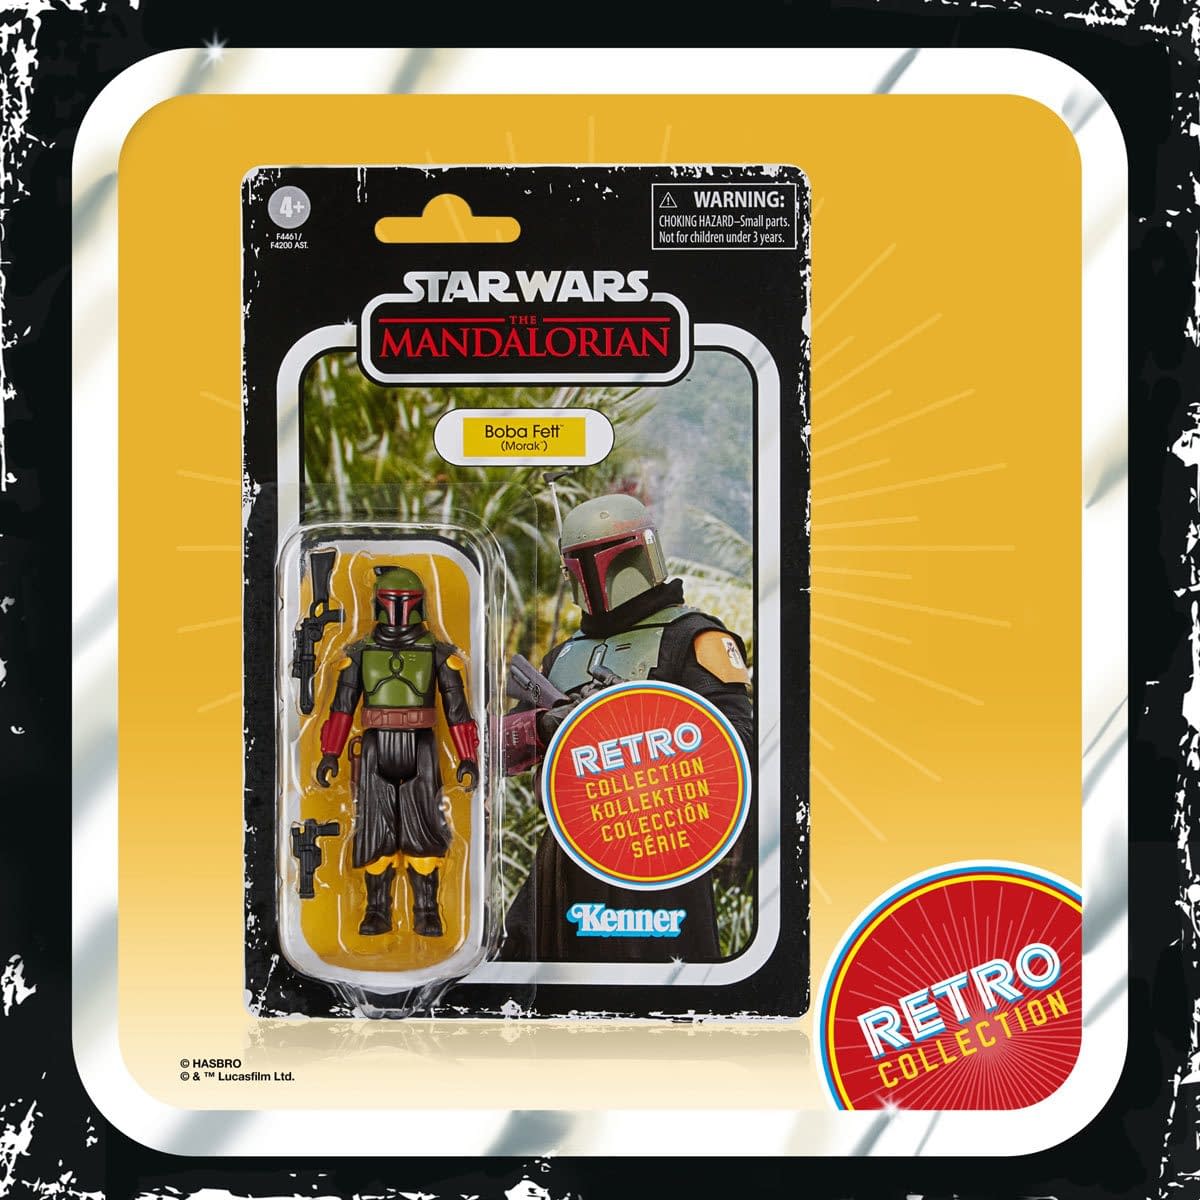 All of The Book of Boba Fett Collectibles You Can Pre-Order Today